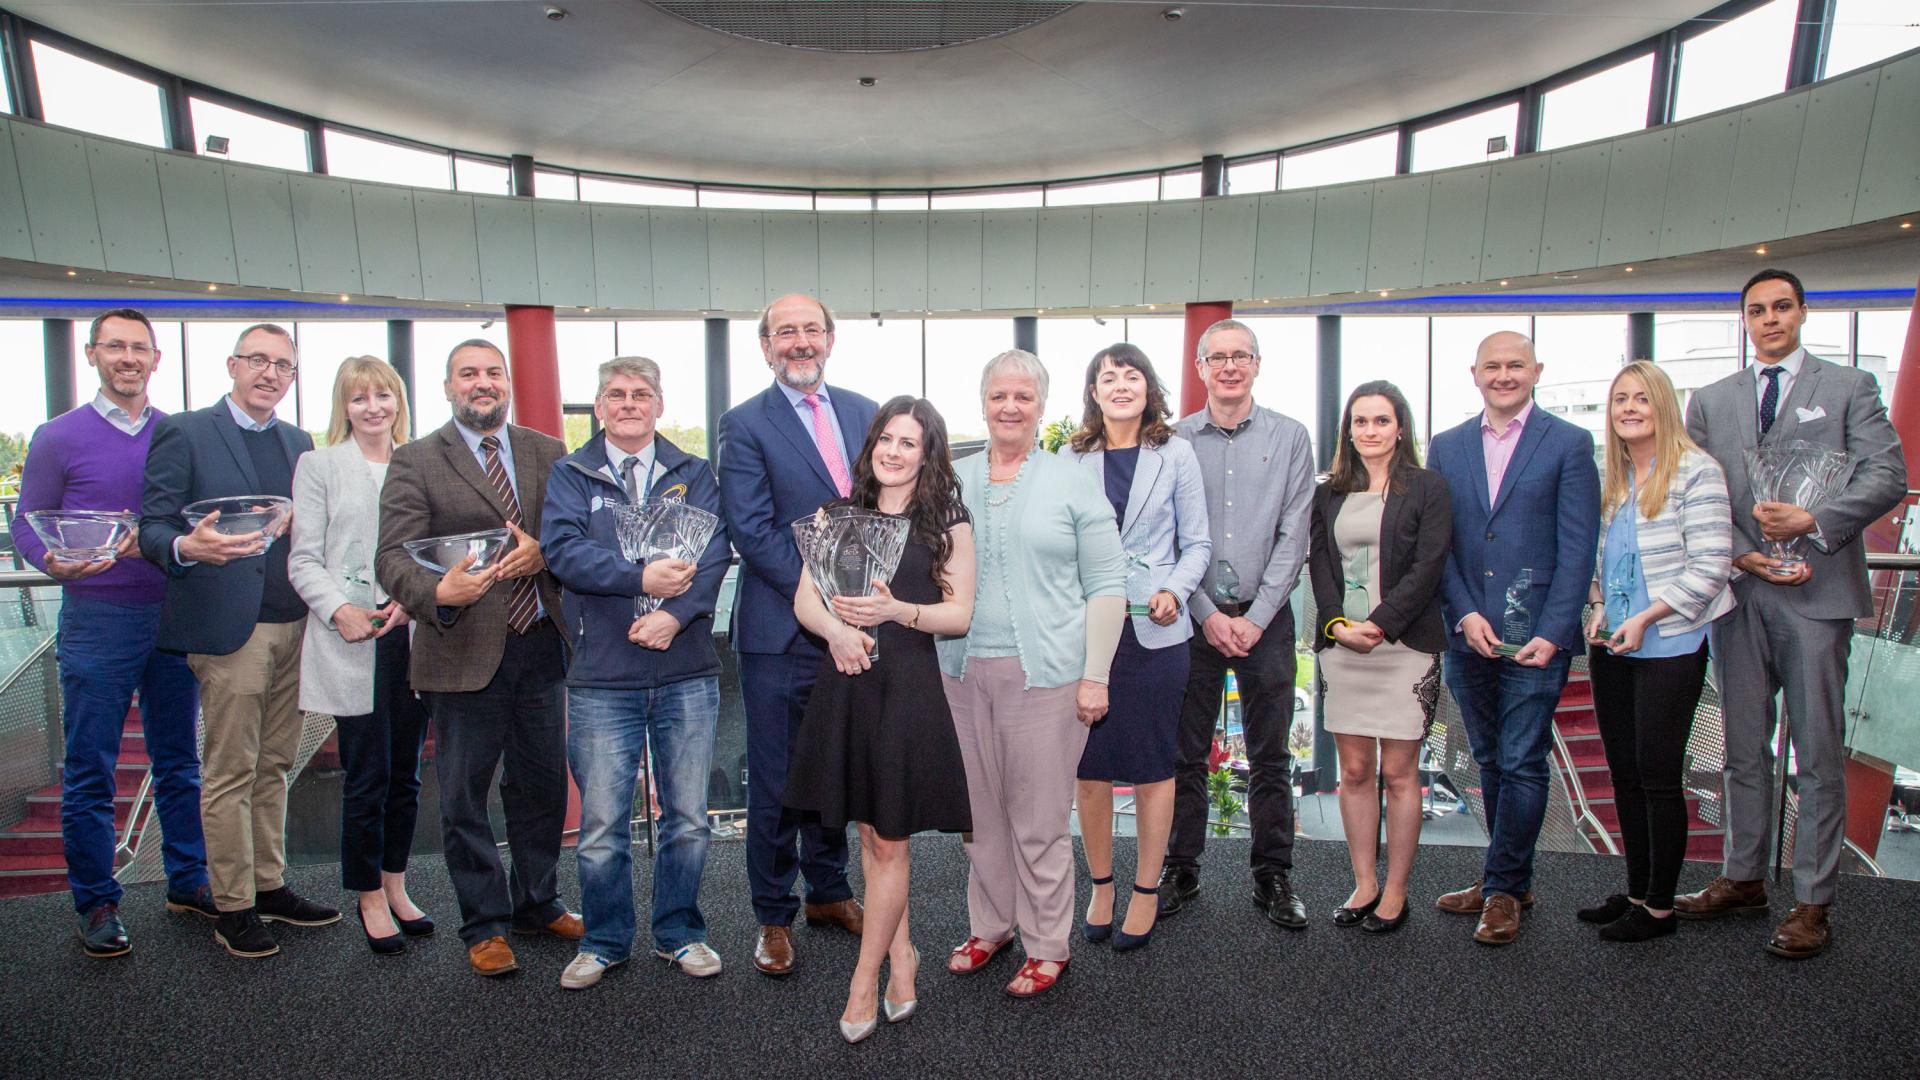 Presidents Awards for Teaching Excellence 2018